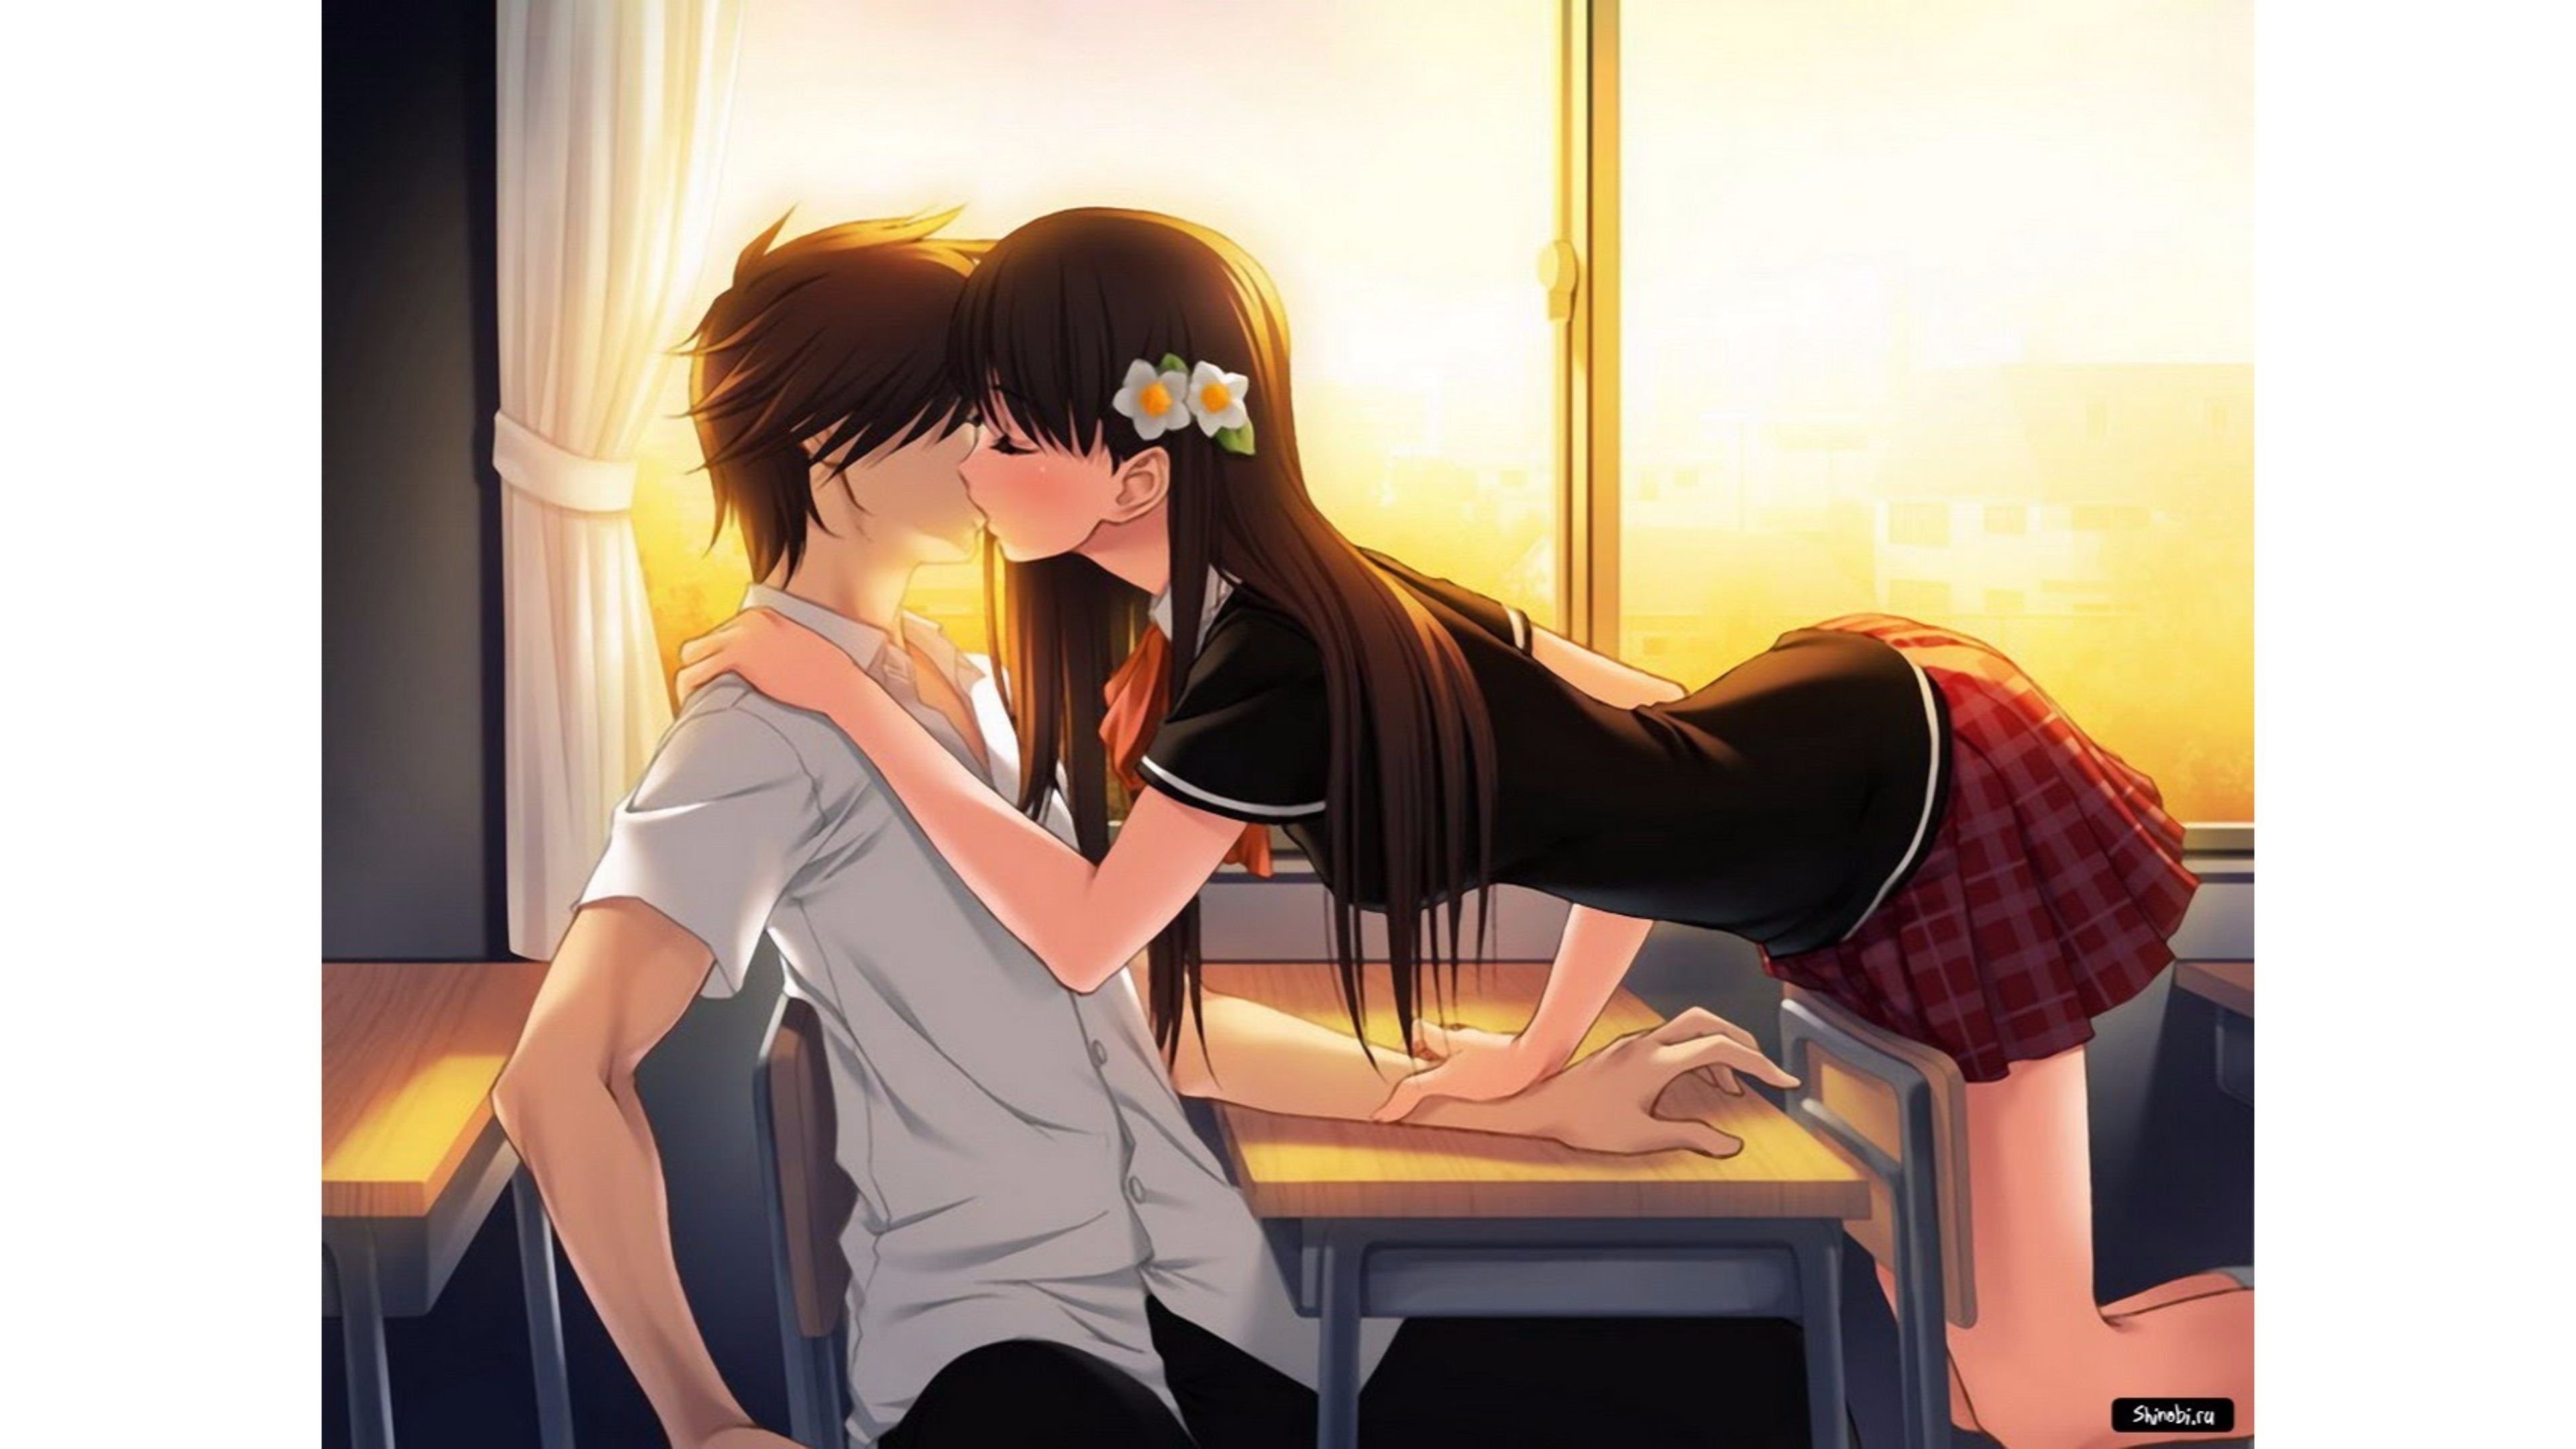 Cute Kissing Anime Wallpapers - Wallpaper Cave